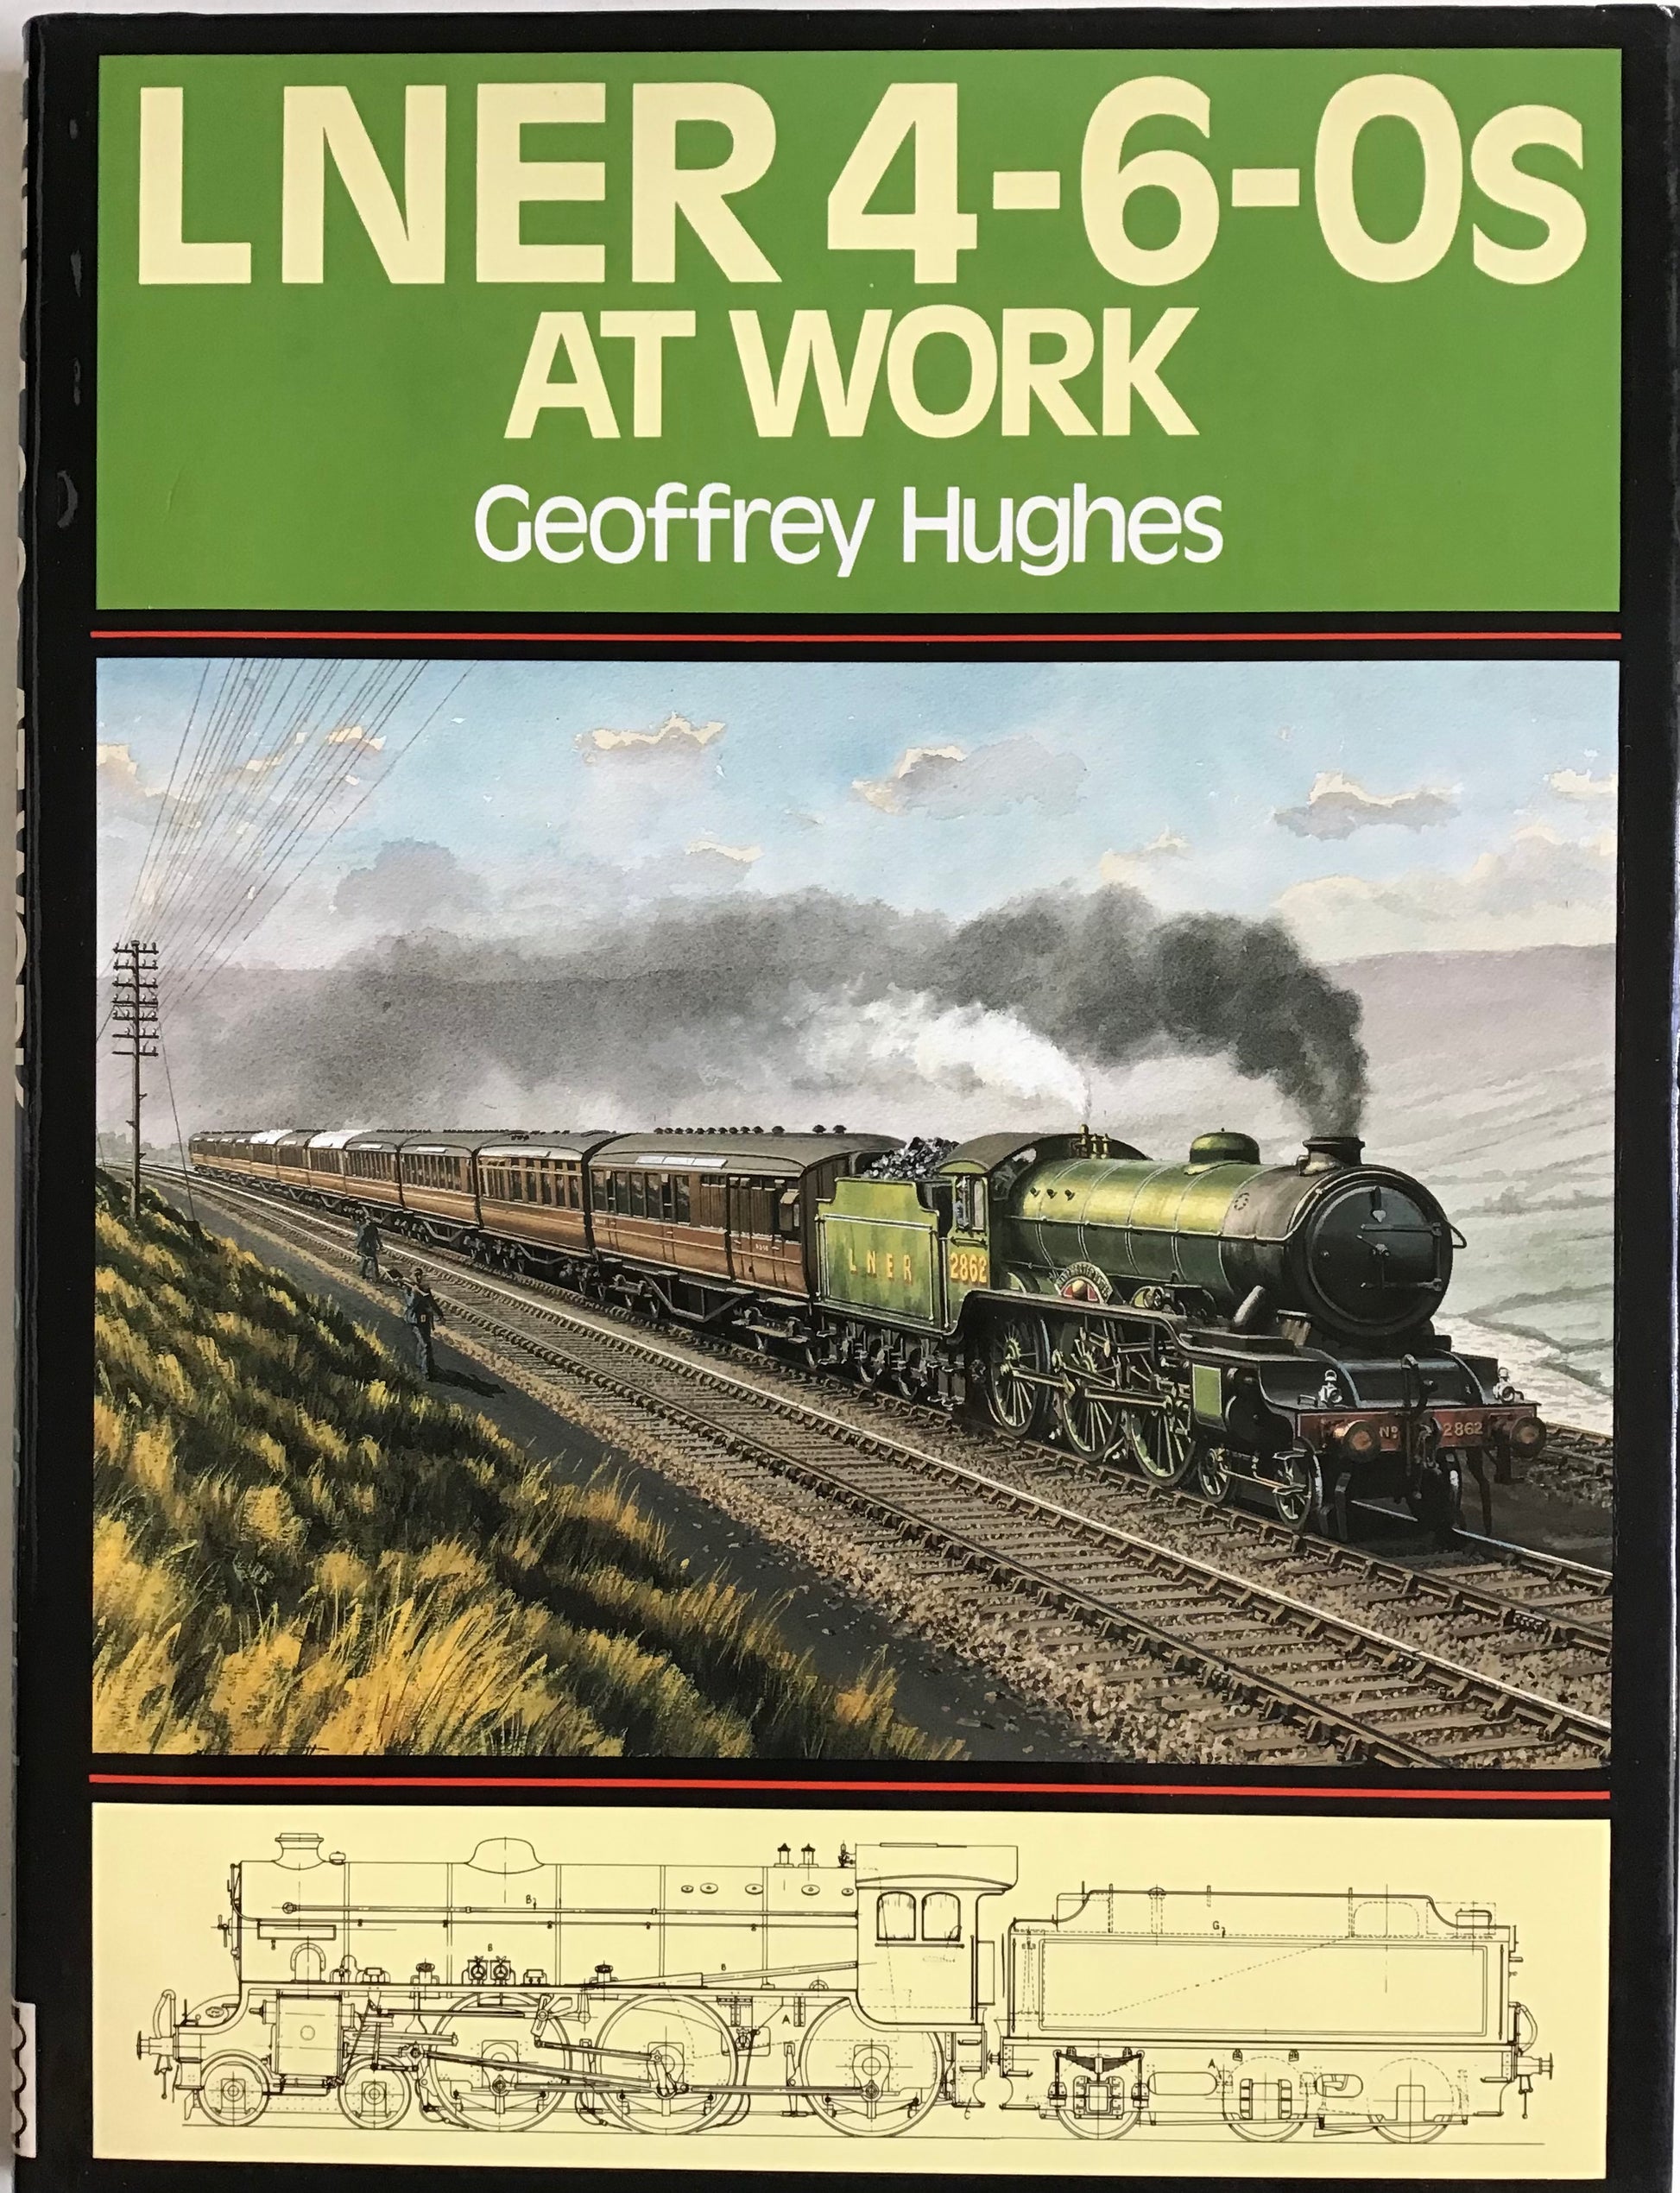 LNER 4-6-0s At Work by Geoffrey Hughes - Chester Model Centre